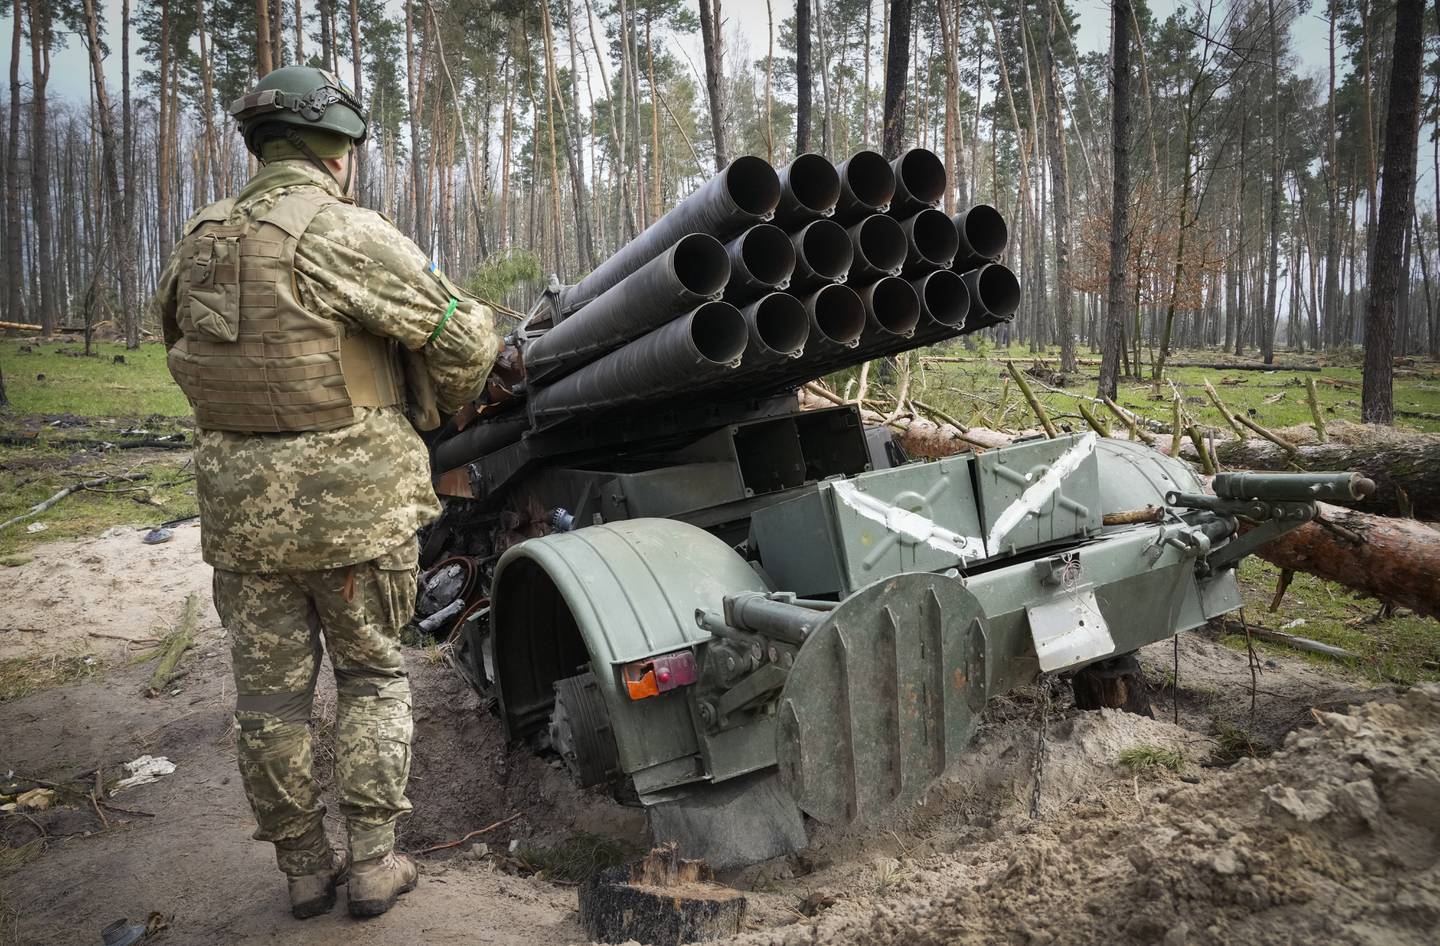 A Ukrainian soldier examines Russian multiple missiles system abandoned by Russian troops in the village of Berezivka, Ukraine, Thursday, April 21, 2022.  Writing on the missiles reads "Russian republic of Buryatiya, Kyakhta".  (AP Photo / Efrem Lukatsky)